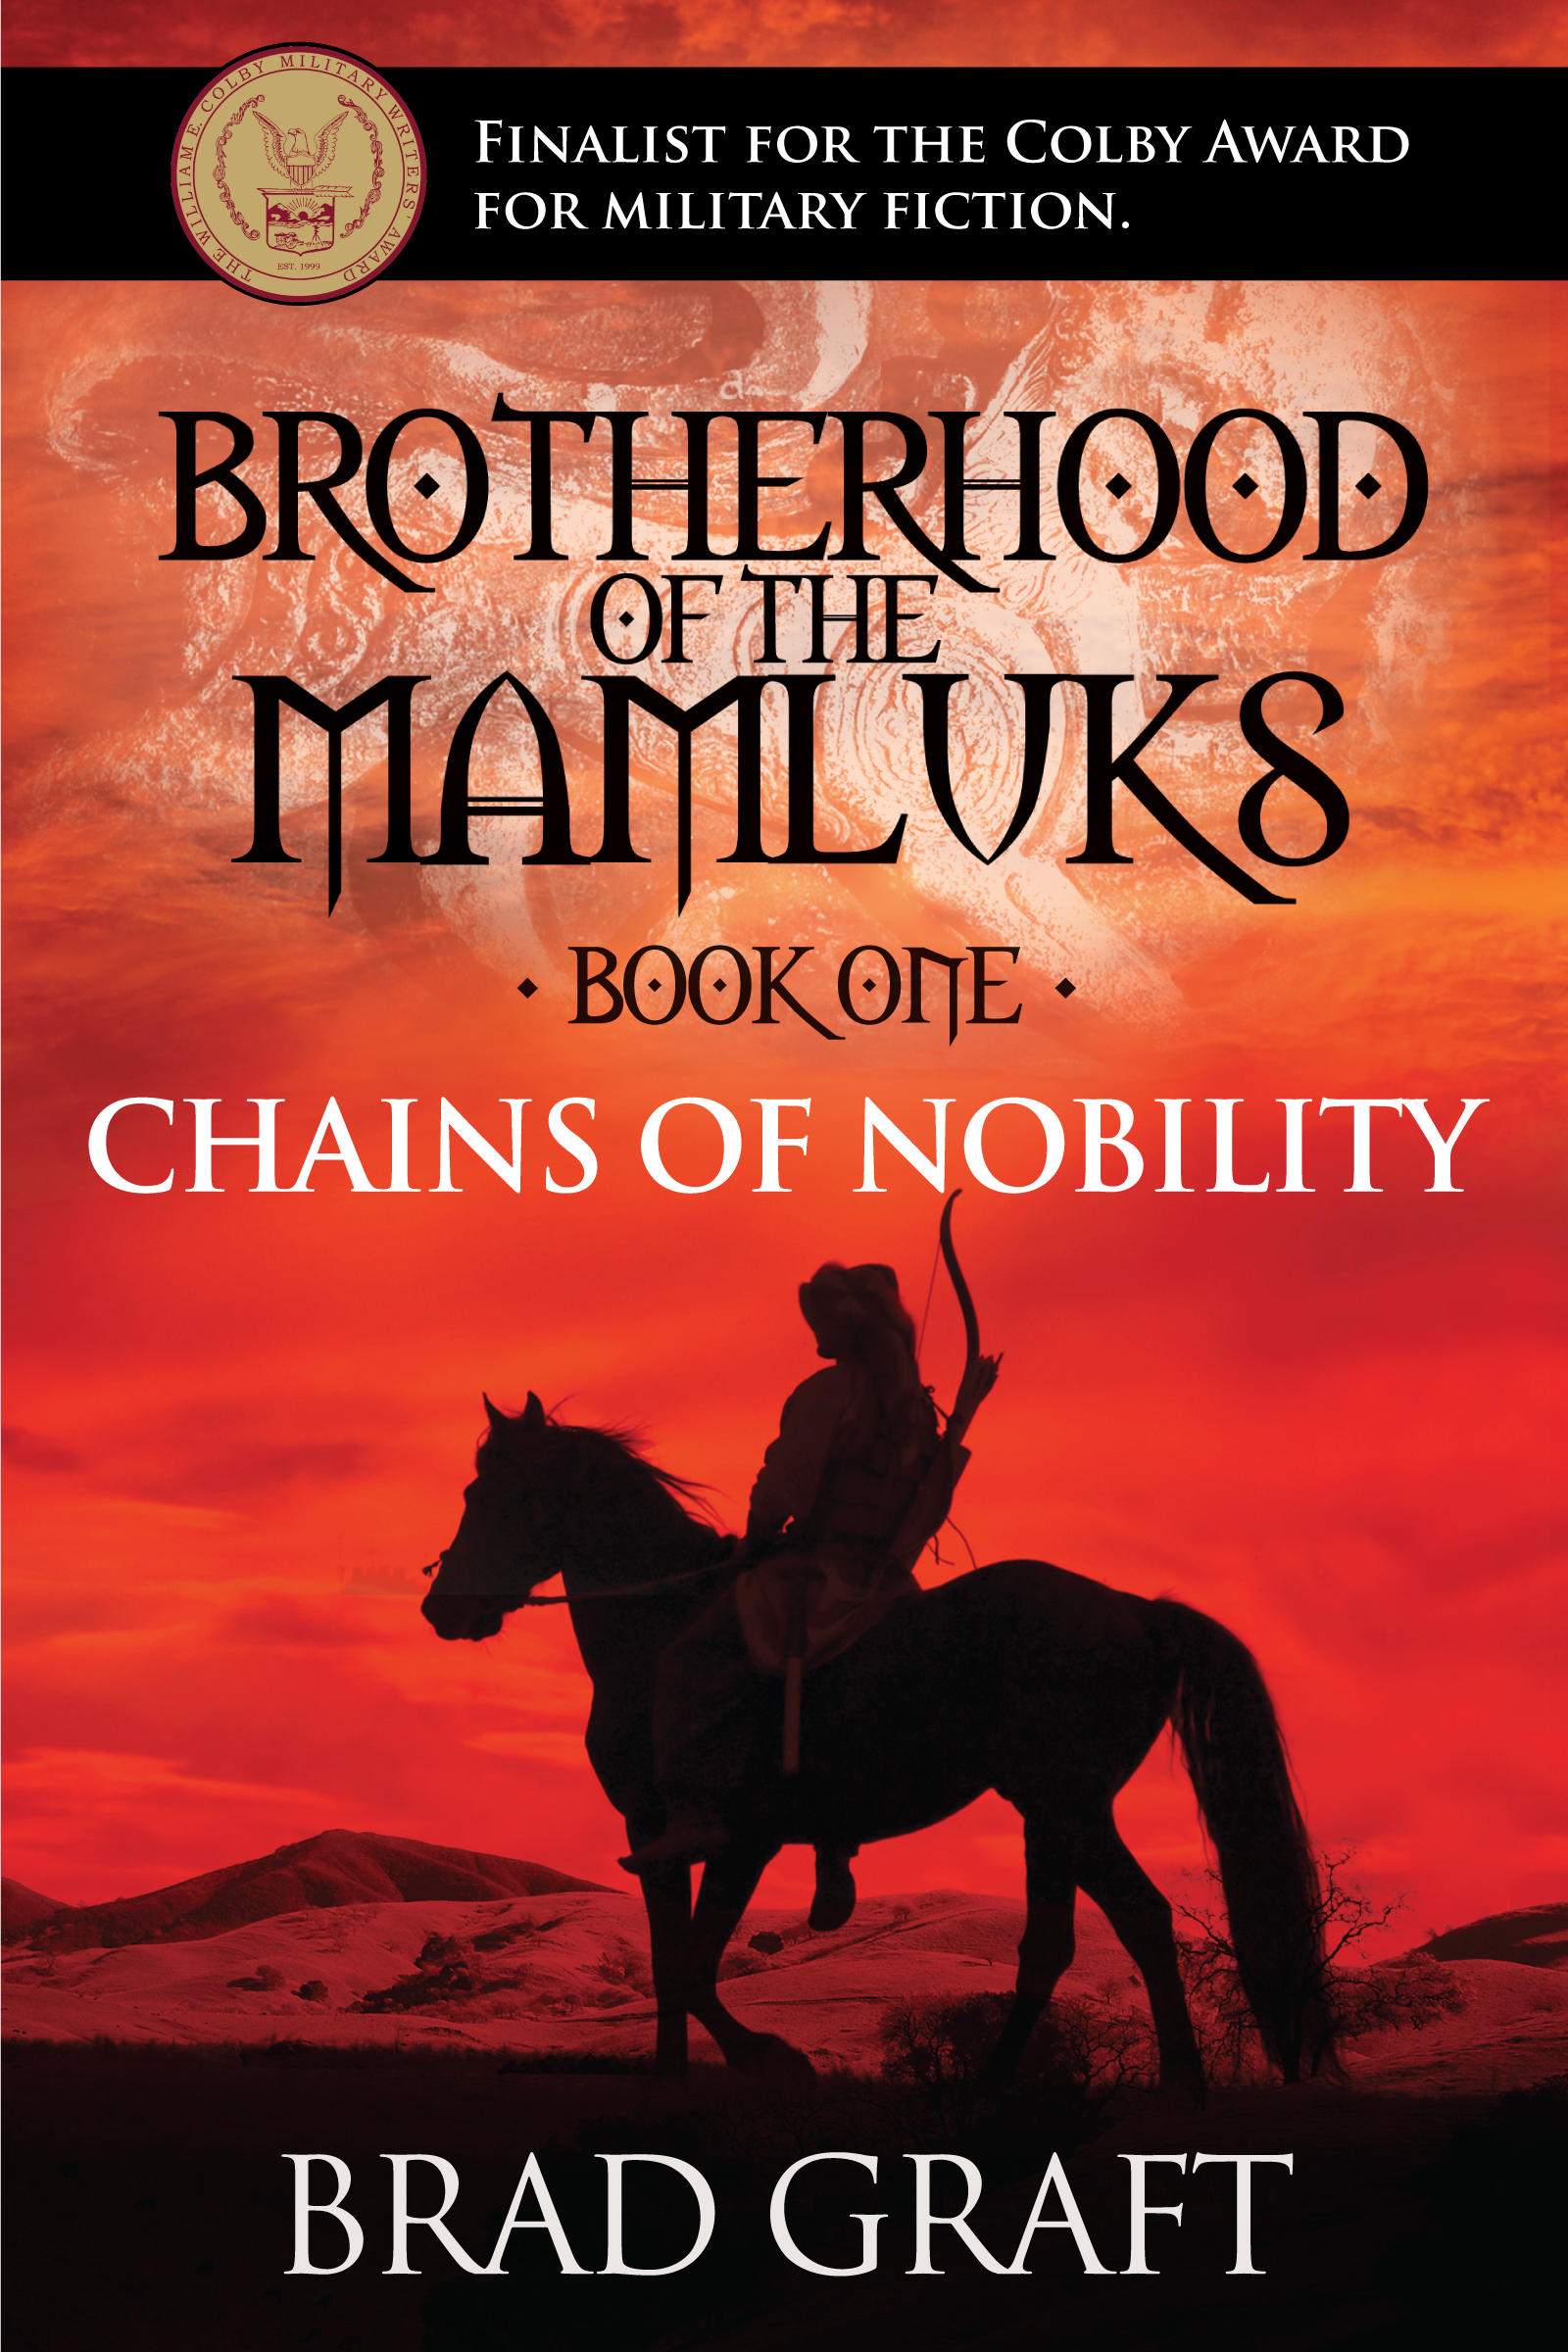 Chains of Nobility